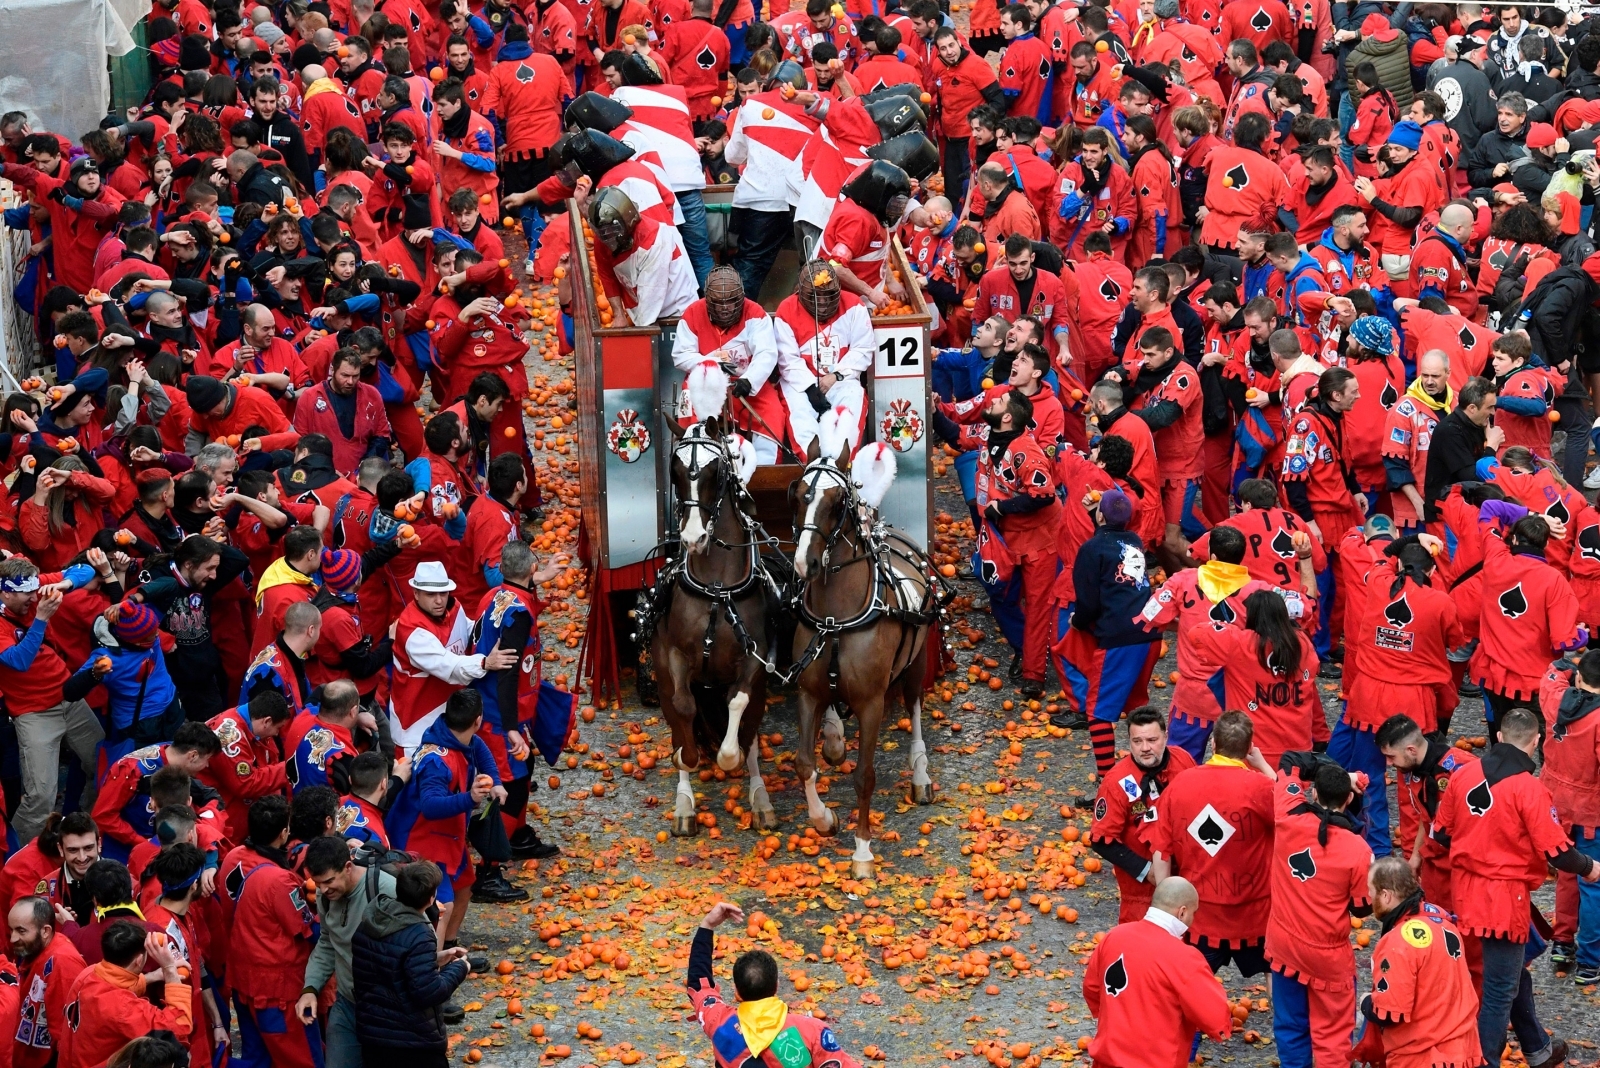 Giant food fight as thousands throw fruit in medieval Battle of the Oranges